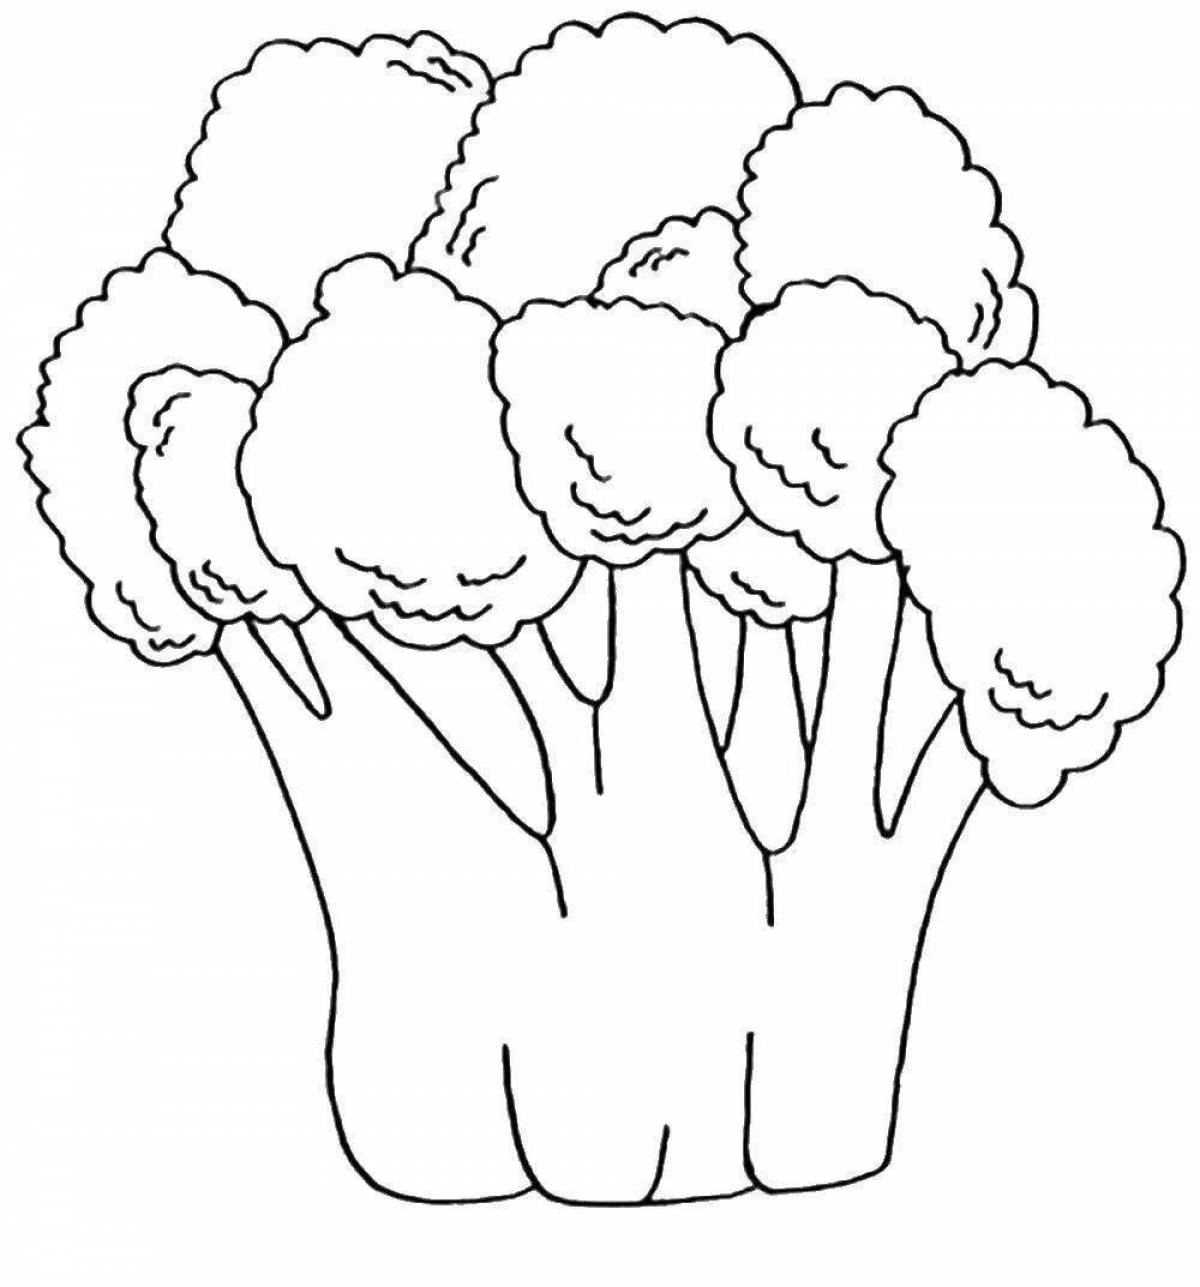 Colorful broccoli coloring page